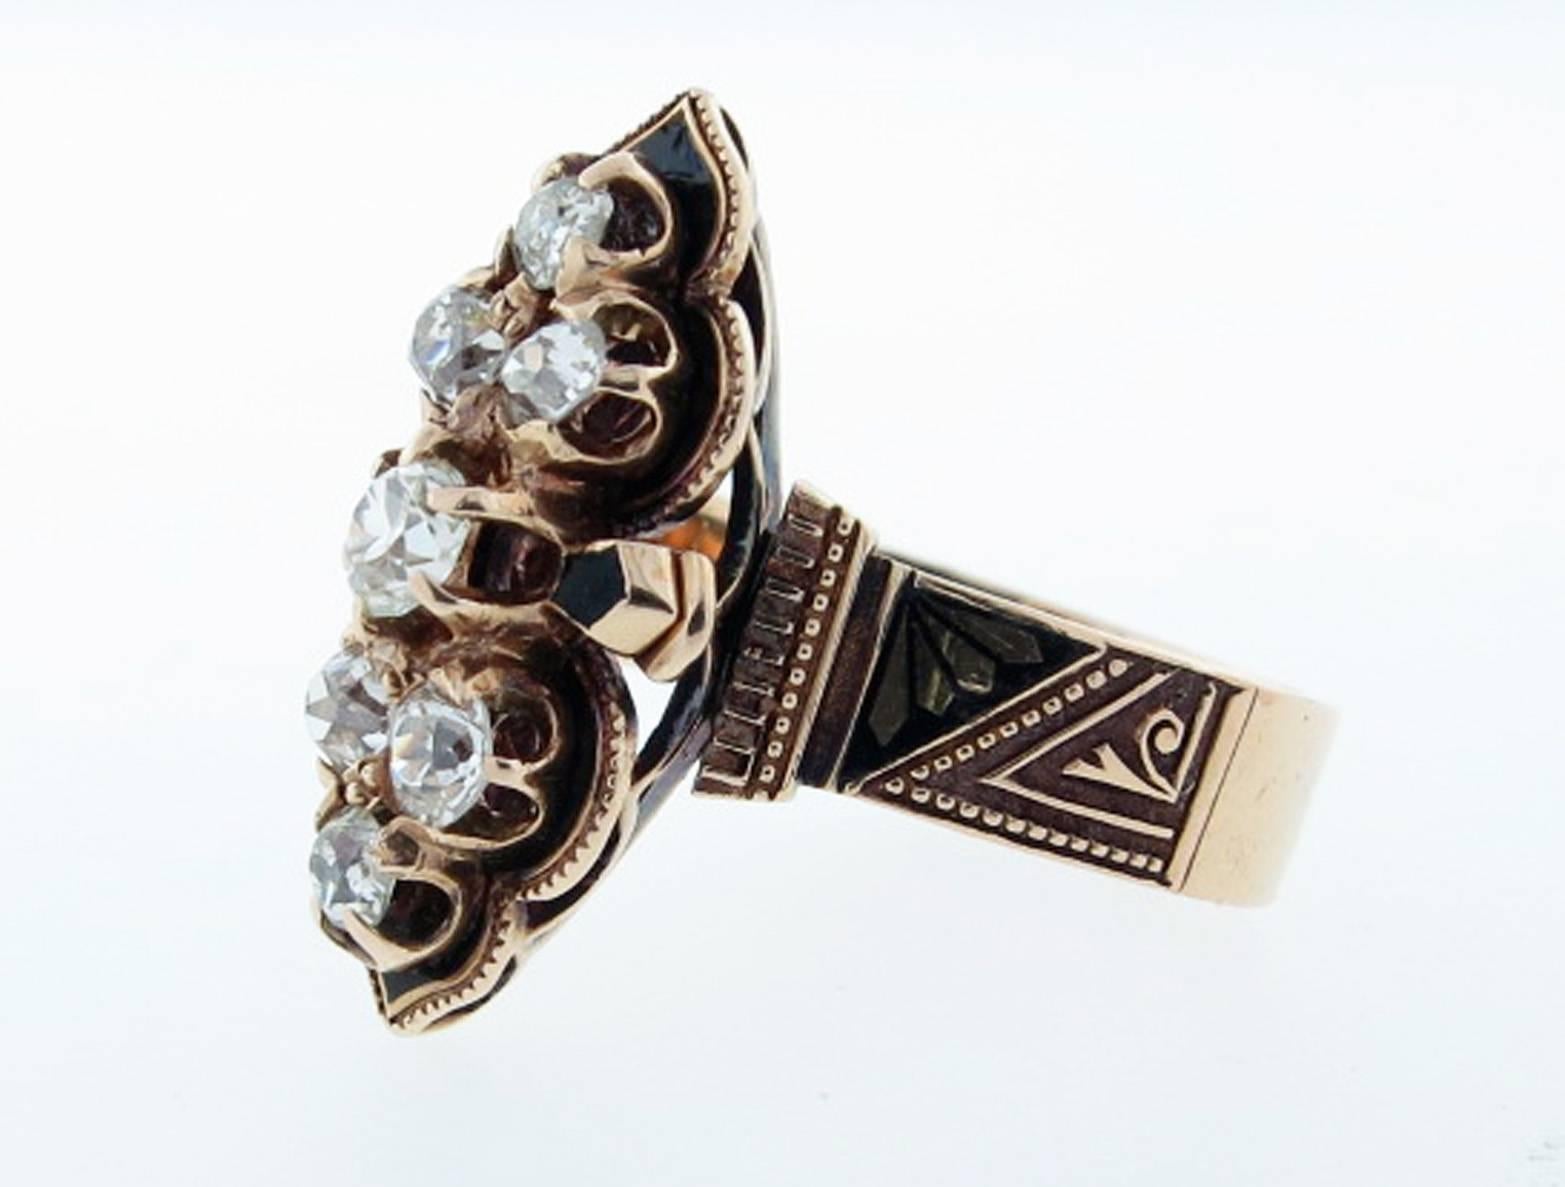 Antique Victorian diamond ring circa 1880 in 14kt. yellow gold. The mount is accented with black enamel tracery work prong set with seven old mine cut diamonds totaling approx ..80cts. Circa 1880. Size 6 1/2 and can be sized.